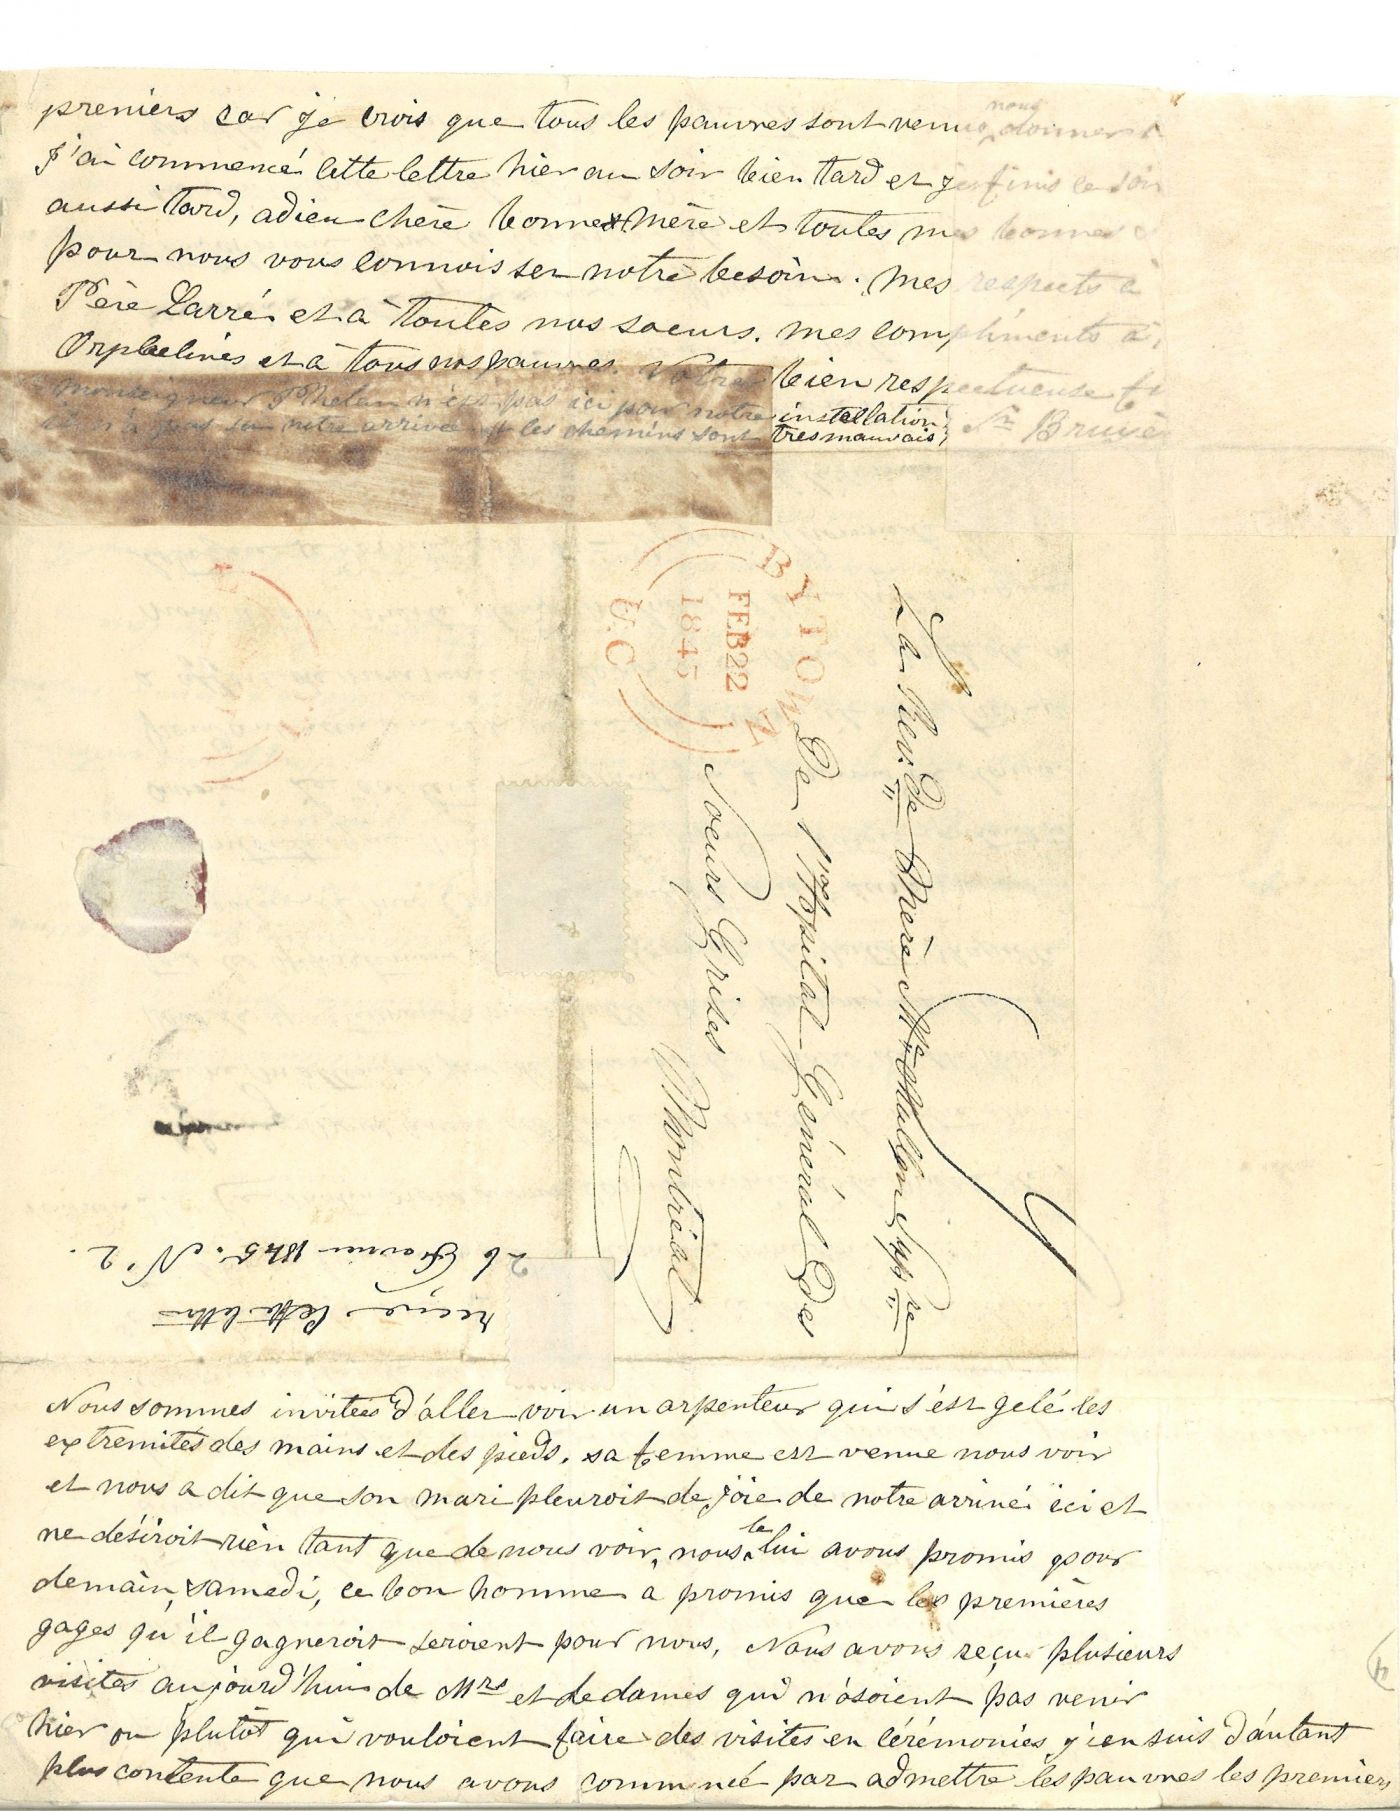 Letters handwritten in French. The document is numbered, and the stamp of the Archives of the Grey Nuns of Montreal appears on pages 1 and 3. The first letter is signed by Sister Bruyère; the second letter is not signed. Page 6 includes the envelope of the letter with the postmark and date of receipt.